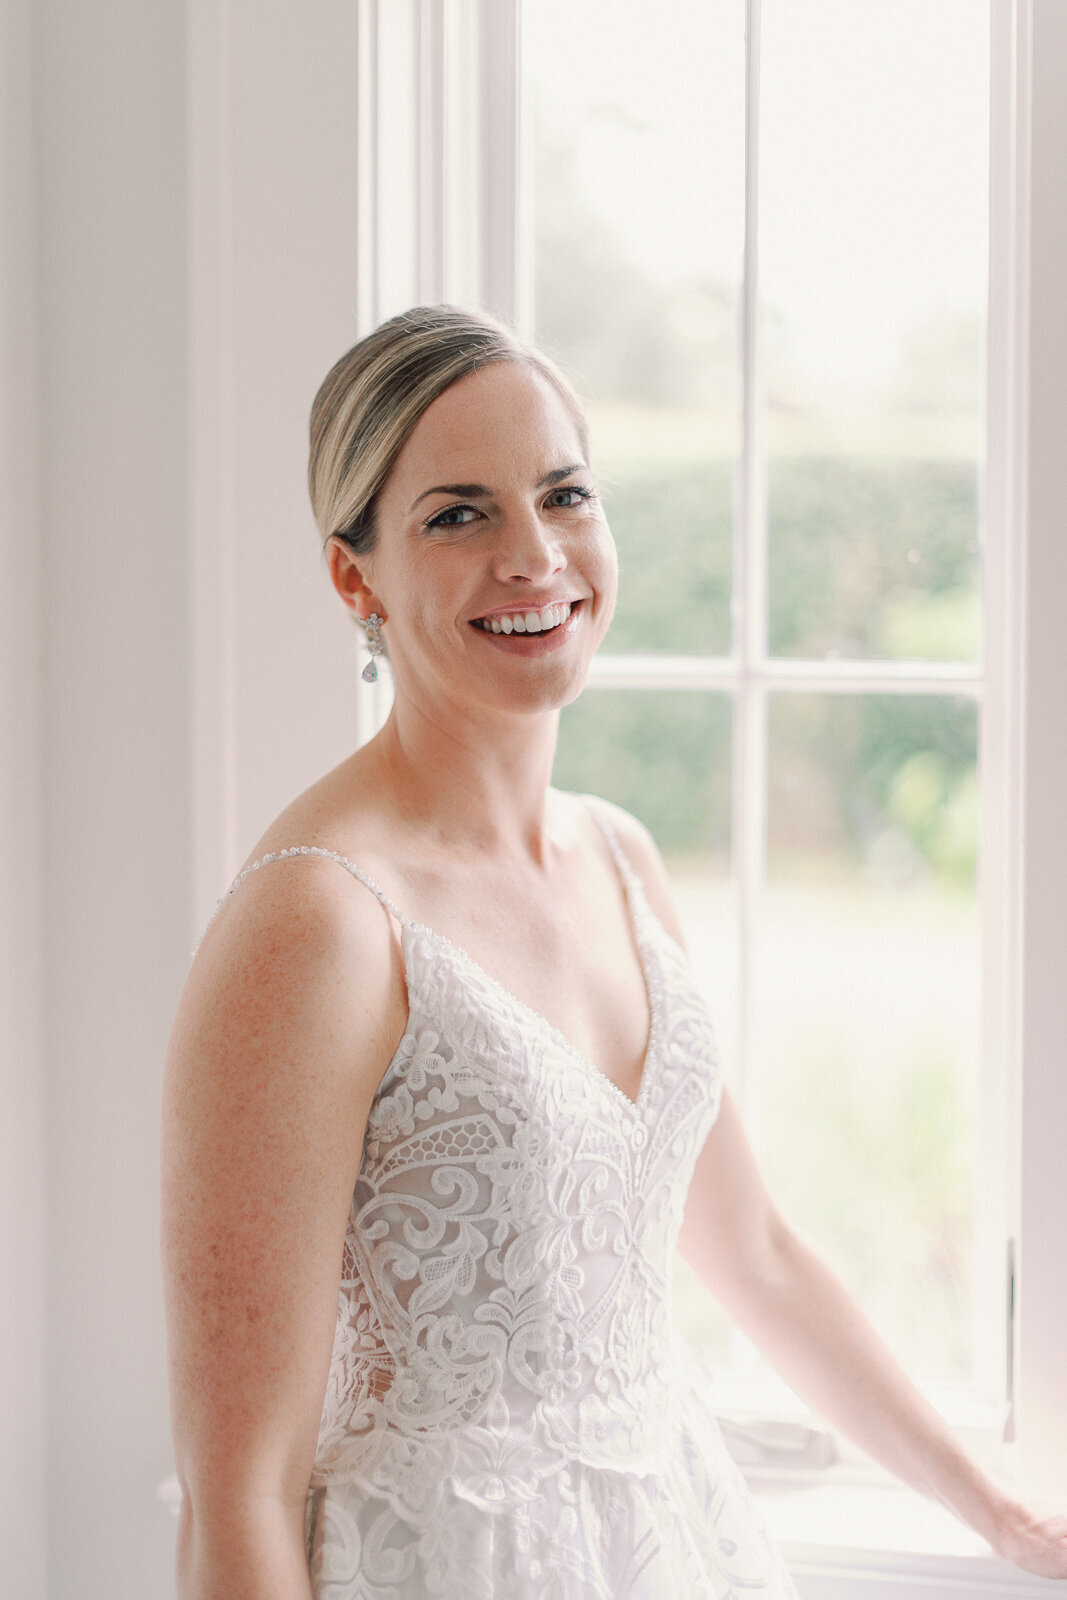 Beautiful bride captured at The Capen House in Winter Park, Florida.